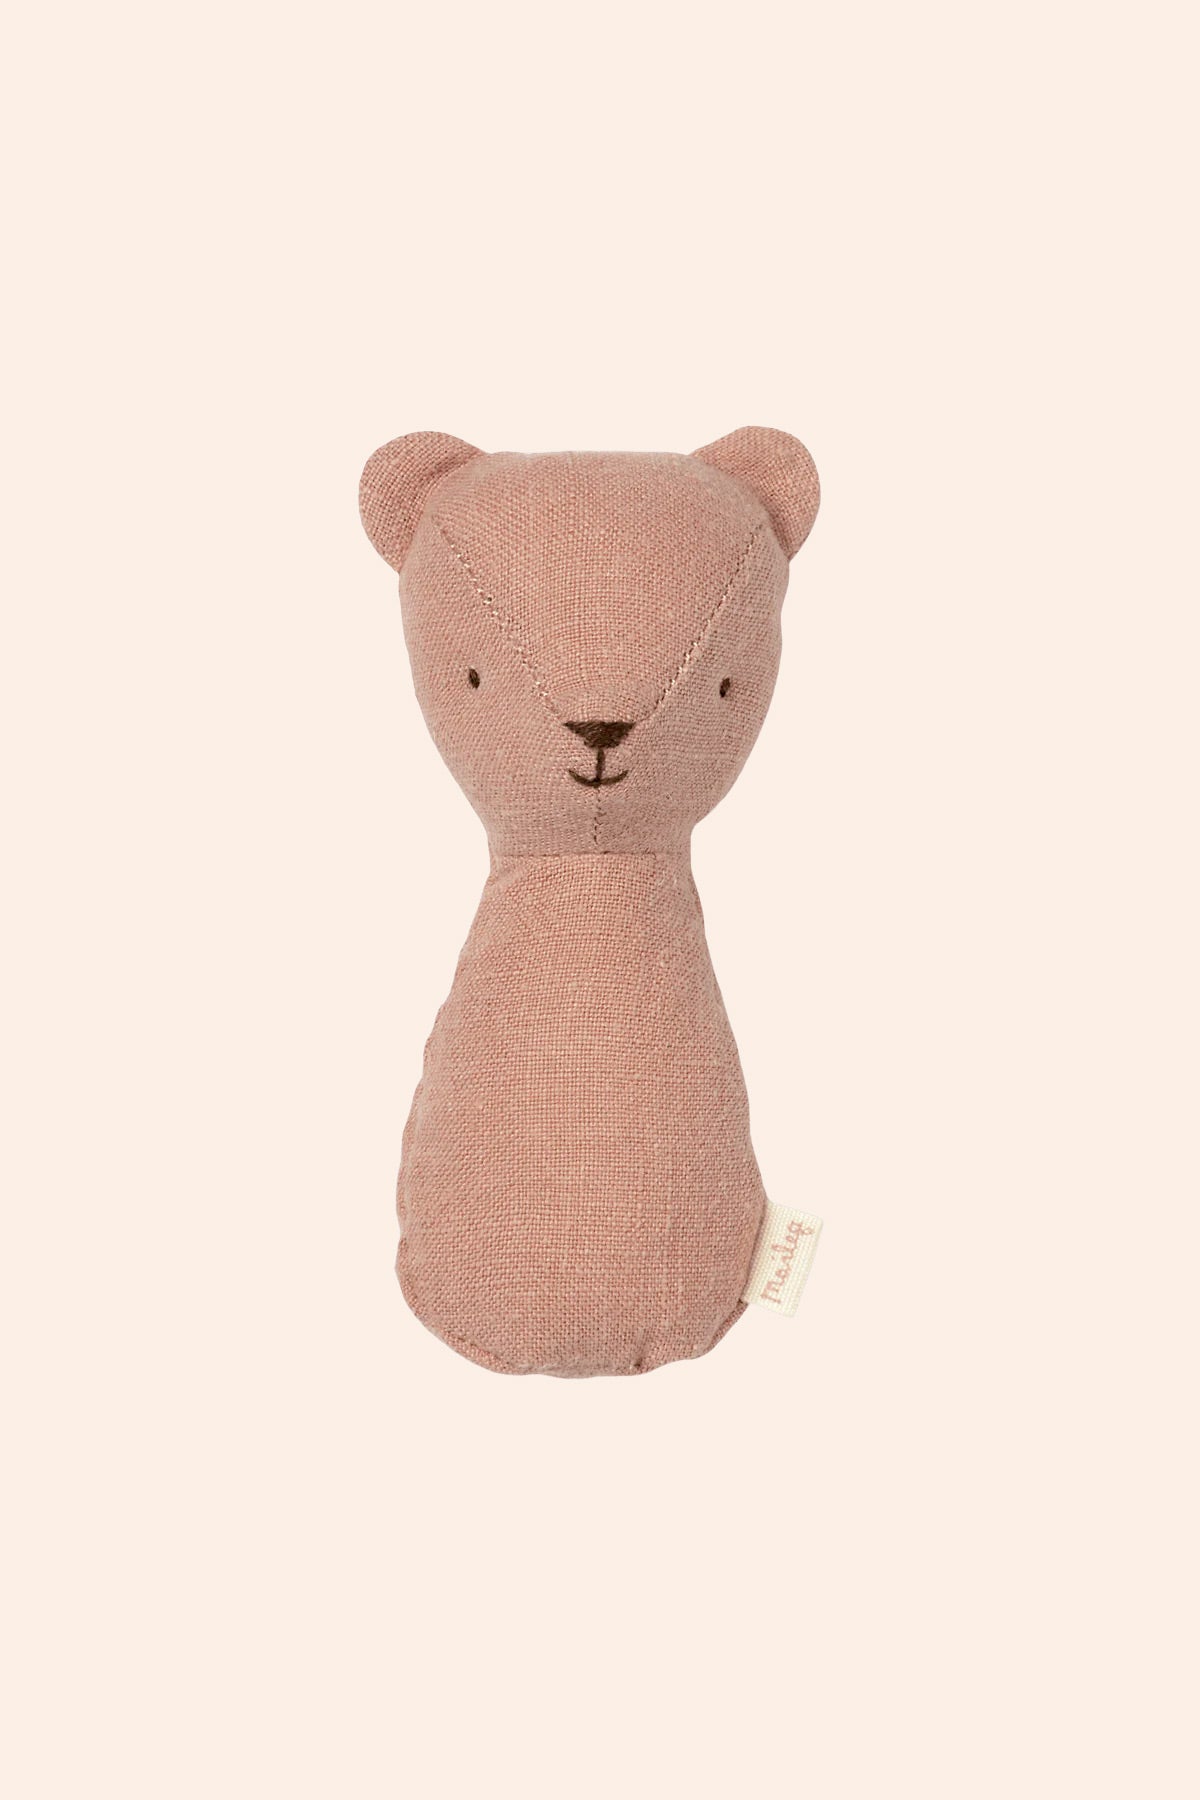 Maileg Teddy Rattle - Old Rose